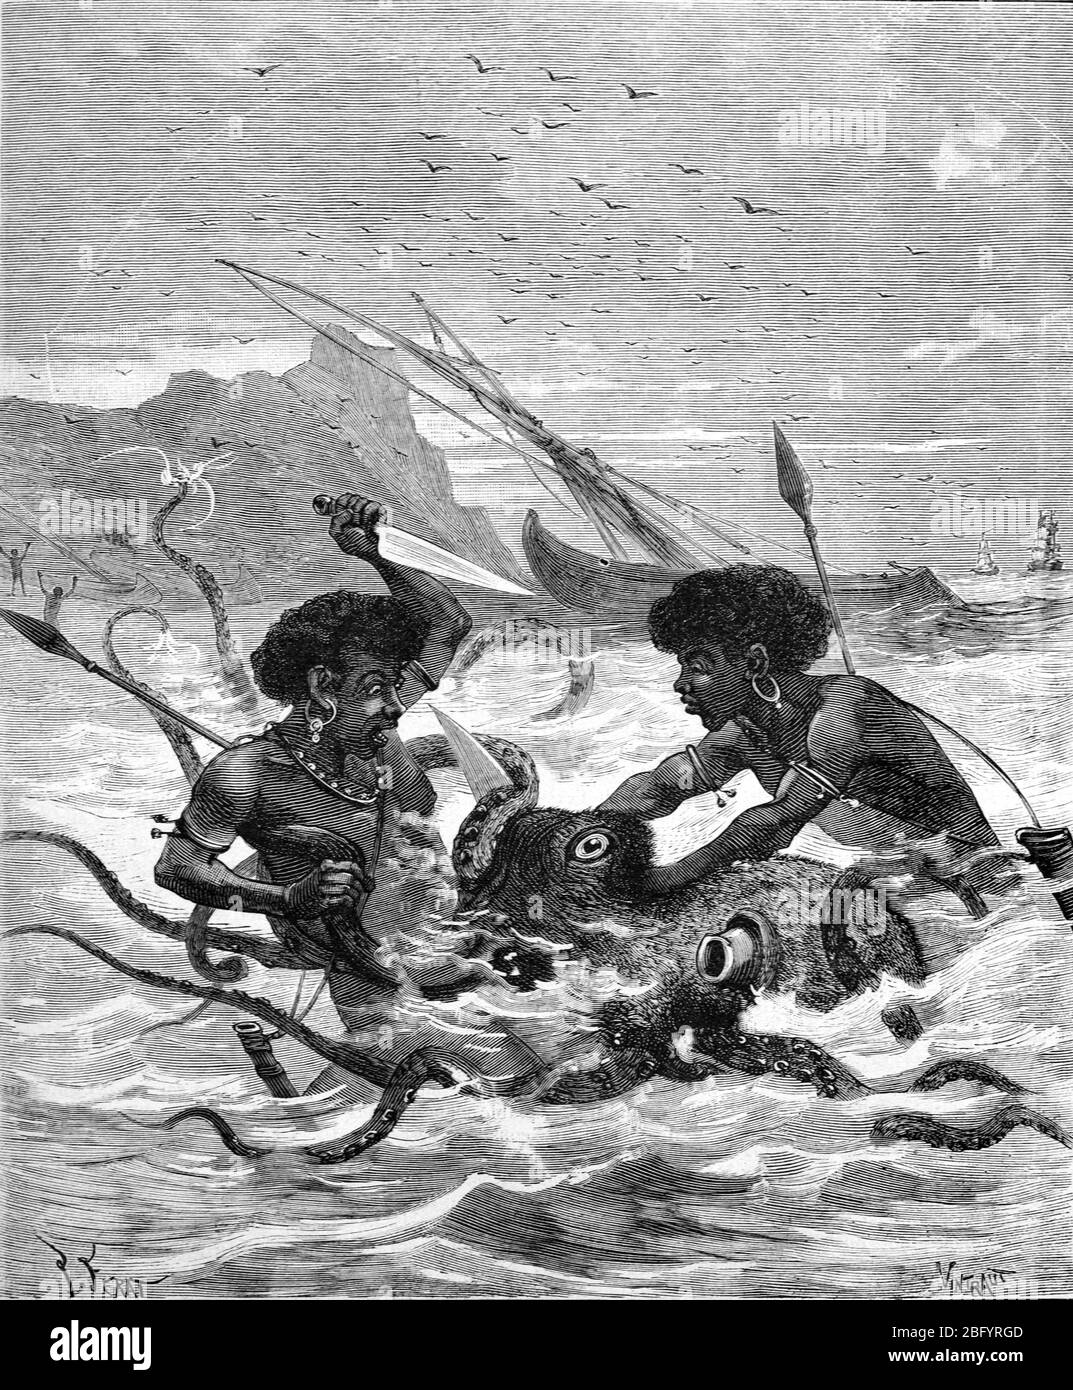 Attack by Giant Octopus Atacking Native Islanders in Mangaia, Cook Islands, Oceania. Vintage or Old Illustration or Engraving 1890 Stock Photo